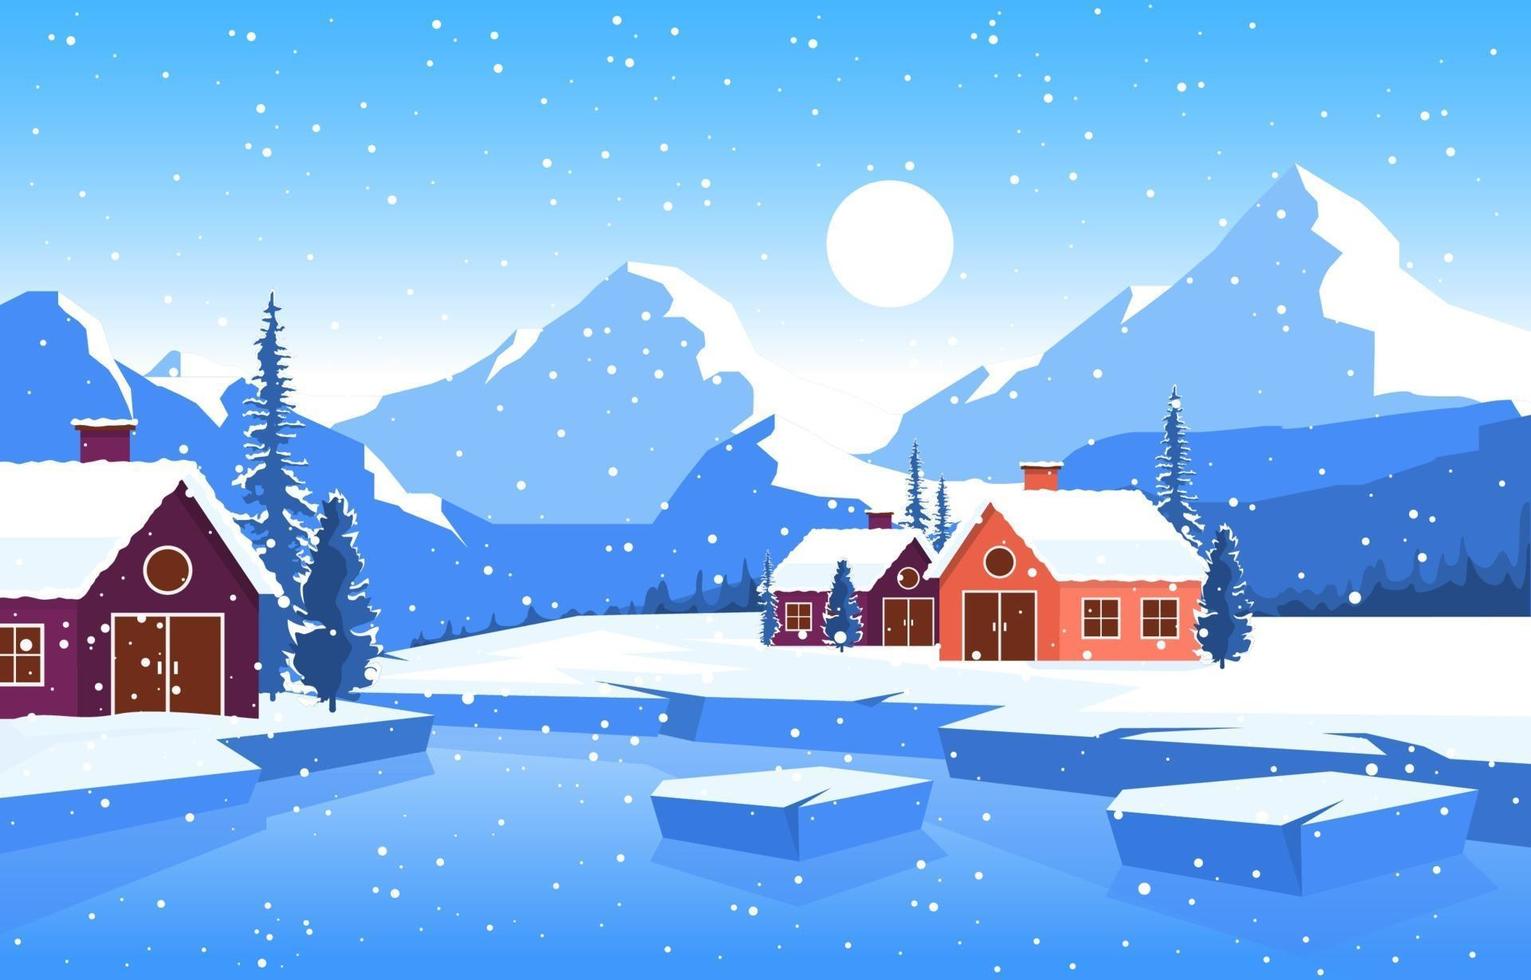 Cozy Winter Forest Scene with Cottages on Frozen Lake vector